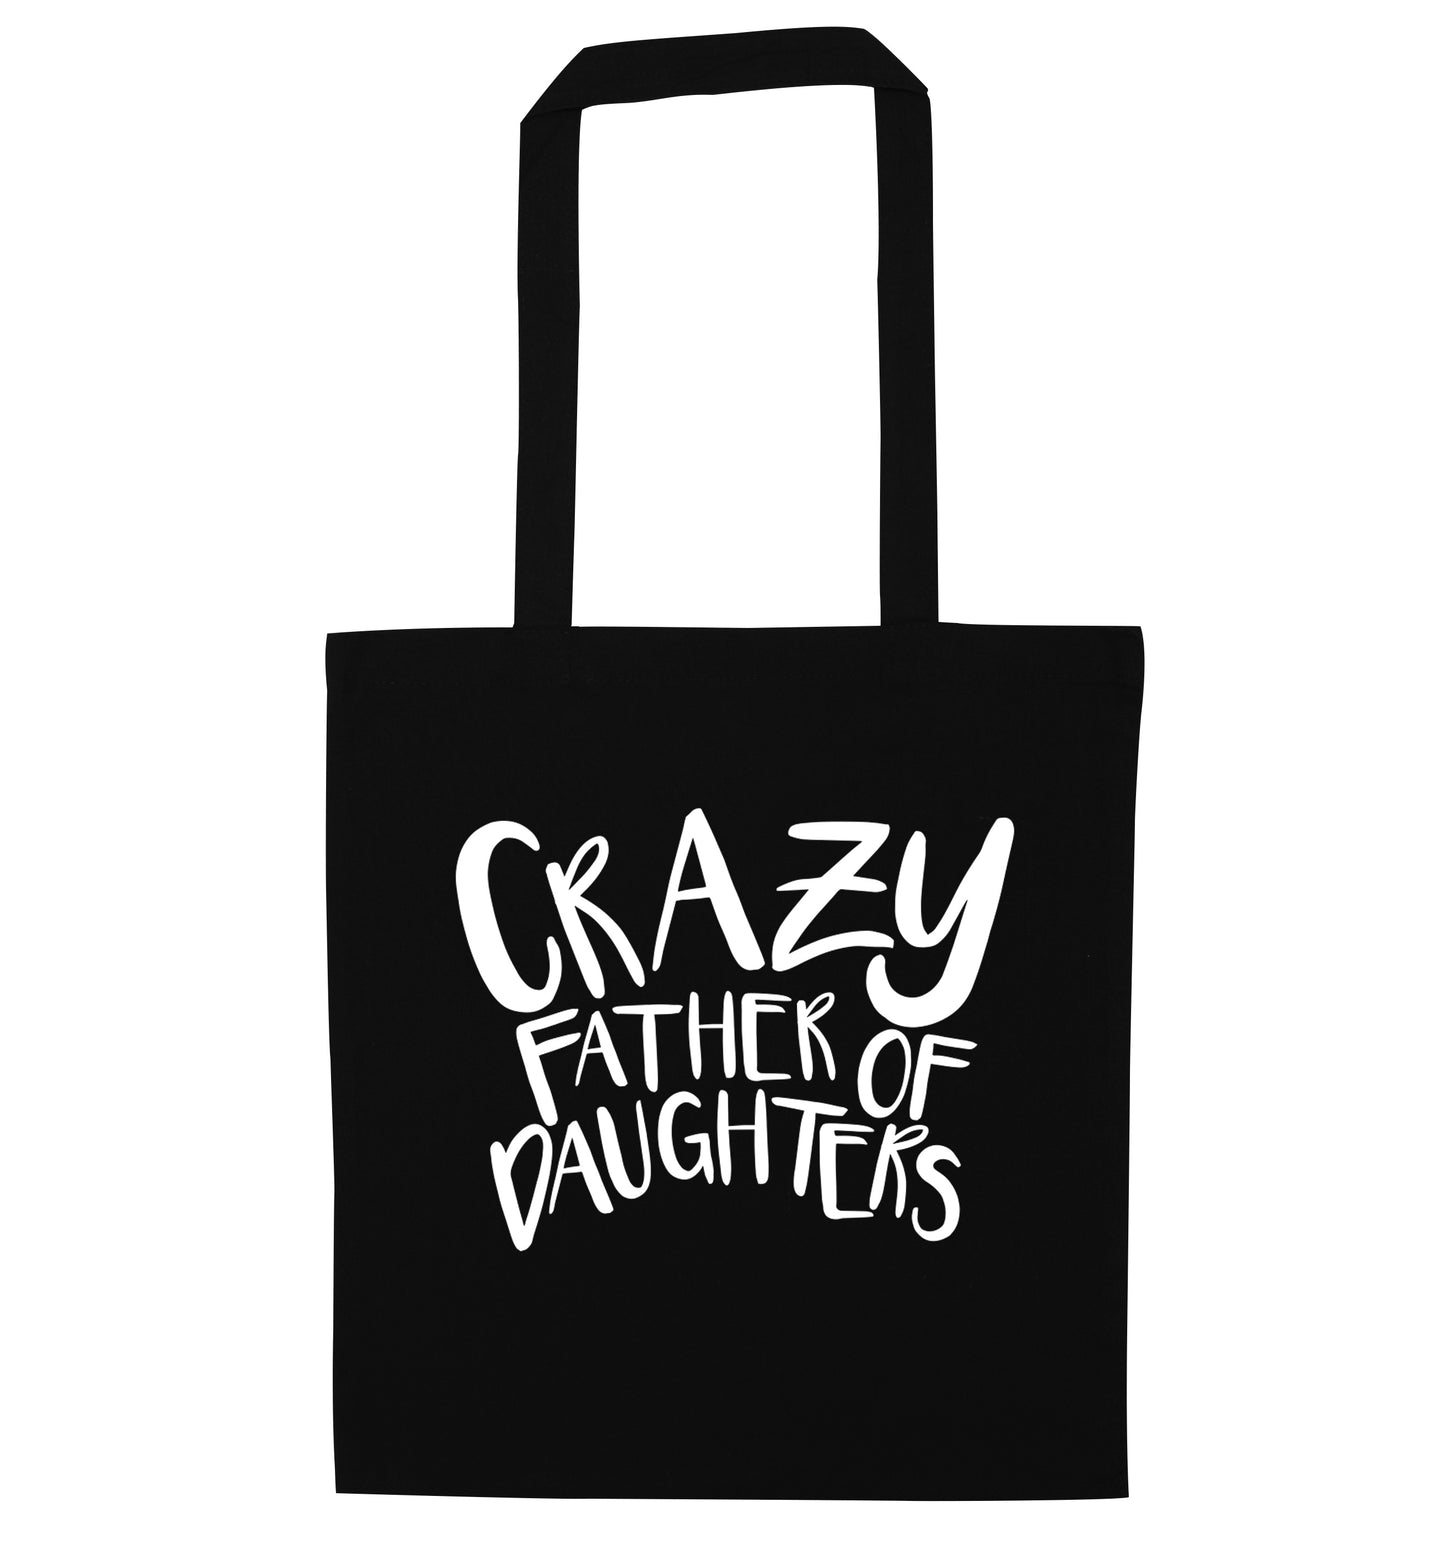 Crazy father of daughters black tote bag